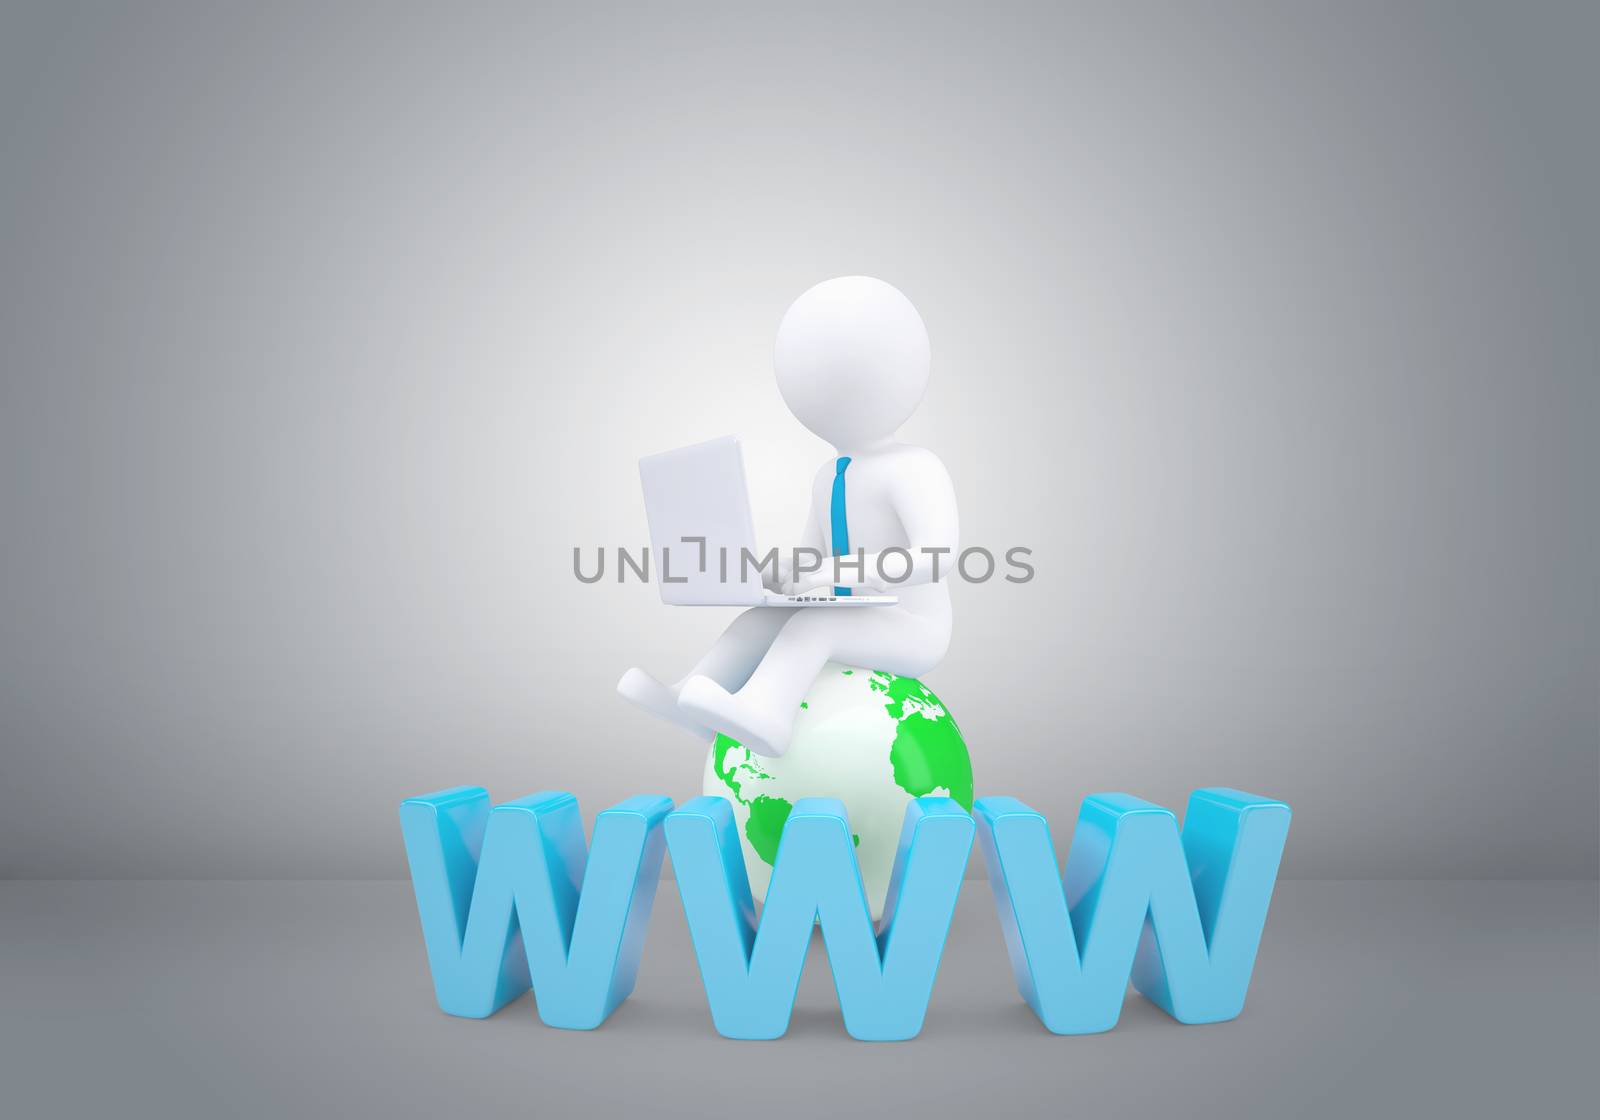 Graphic man with tie sitting on globe. Background of letters www and gray wall